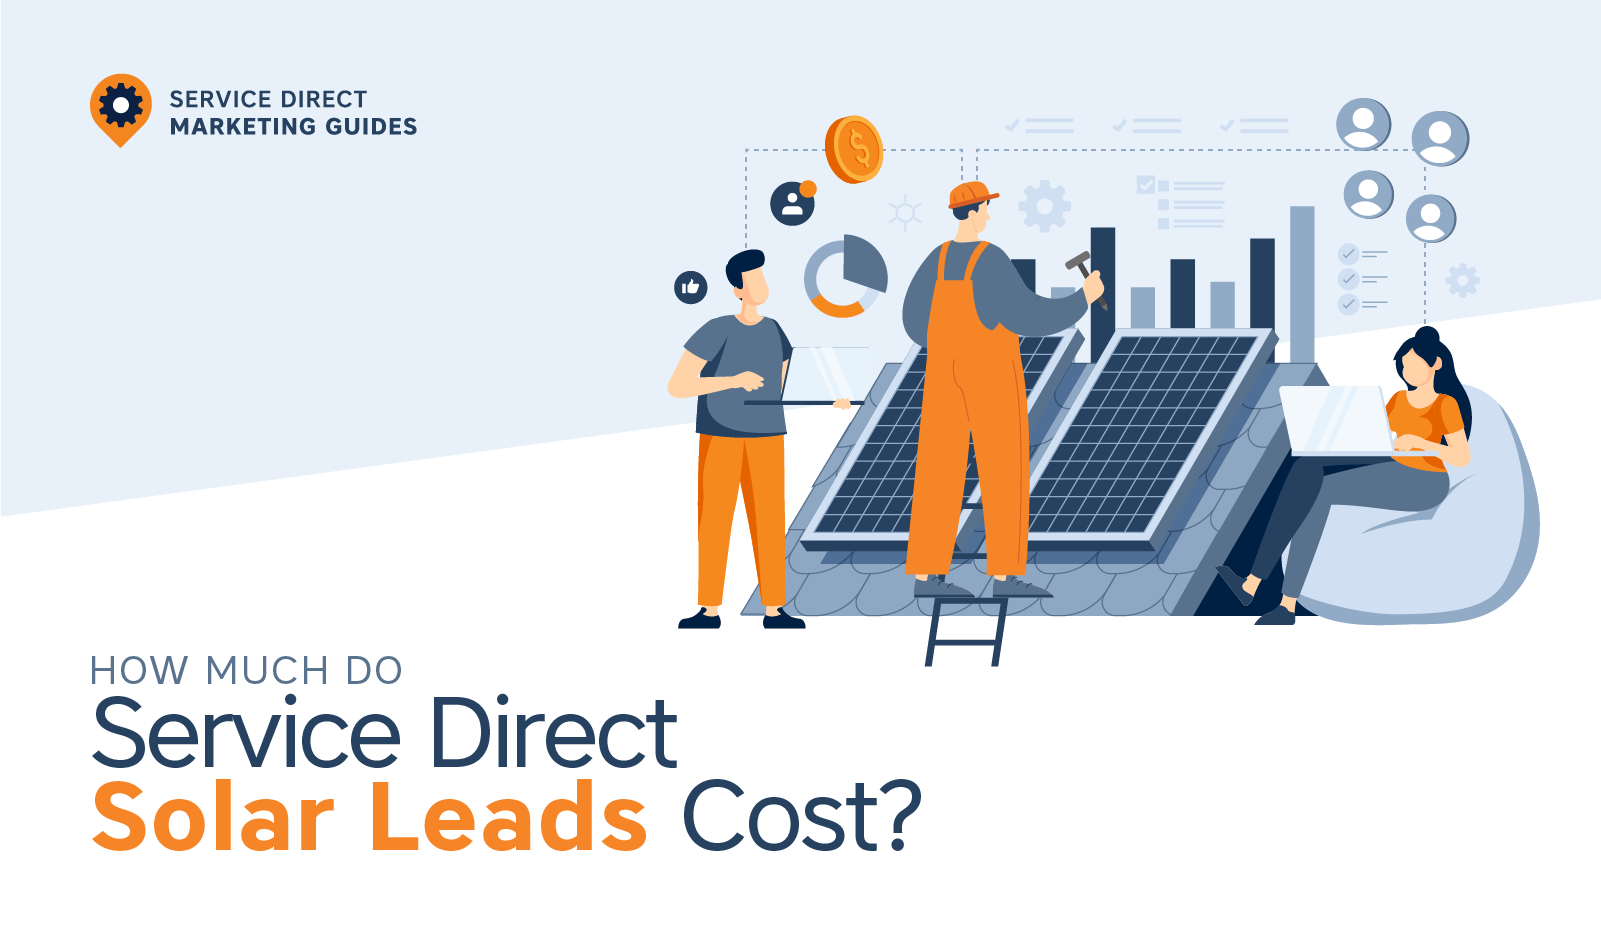 How Much Do Service Direct Solar Leads Cost